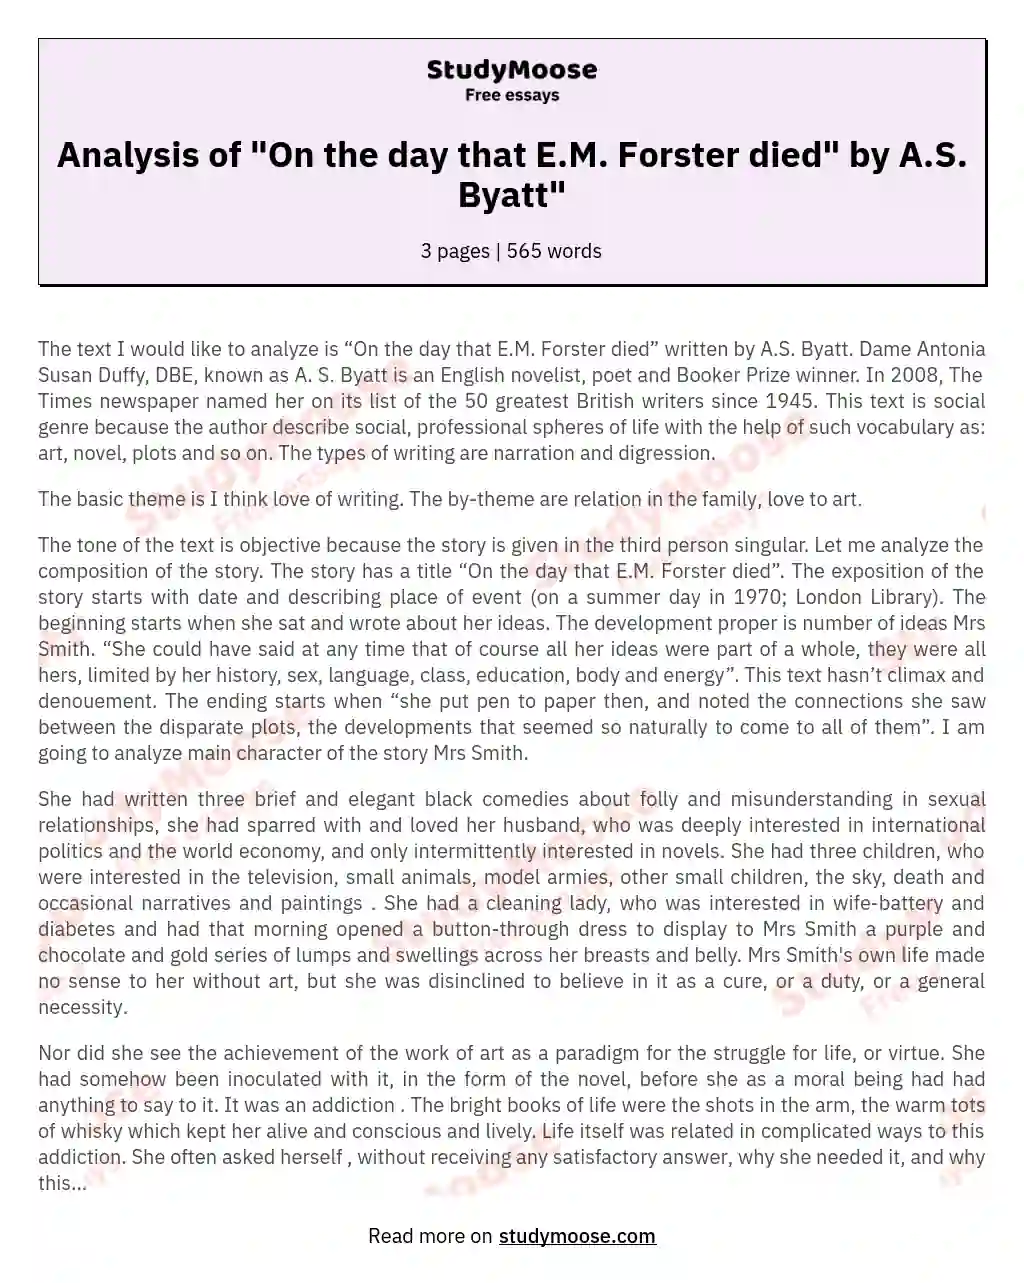 Analysis of "On the day that E.M. Forster died" by A.S. Byatt" essay